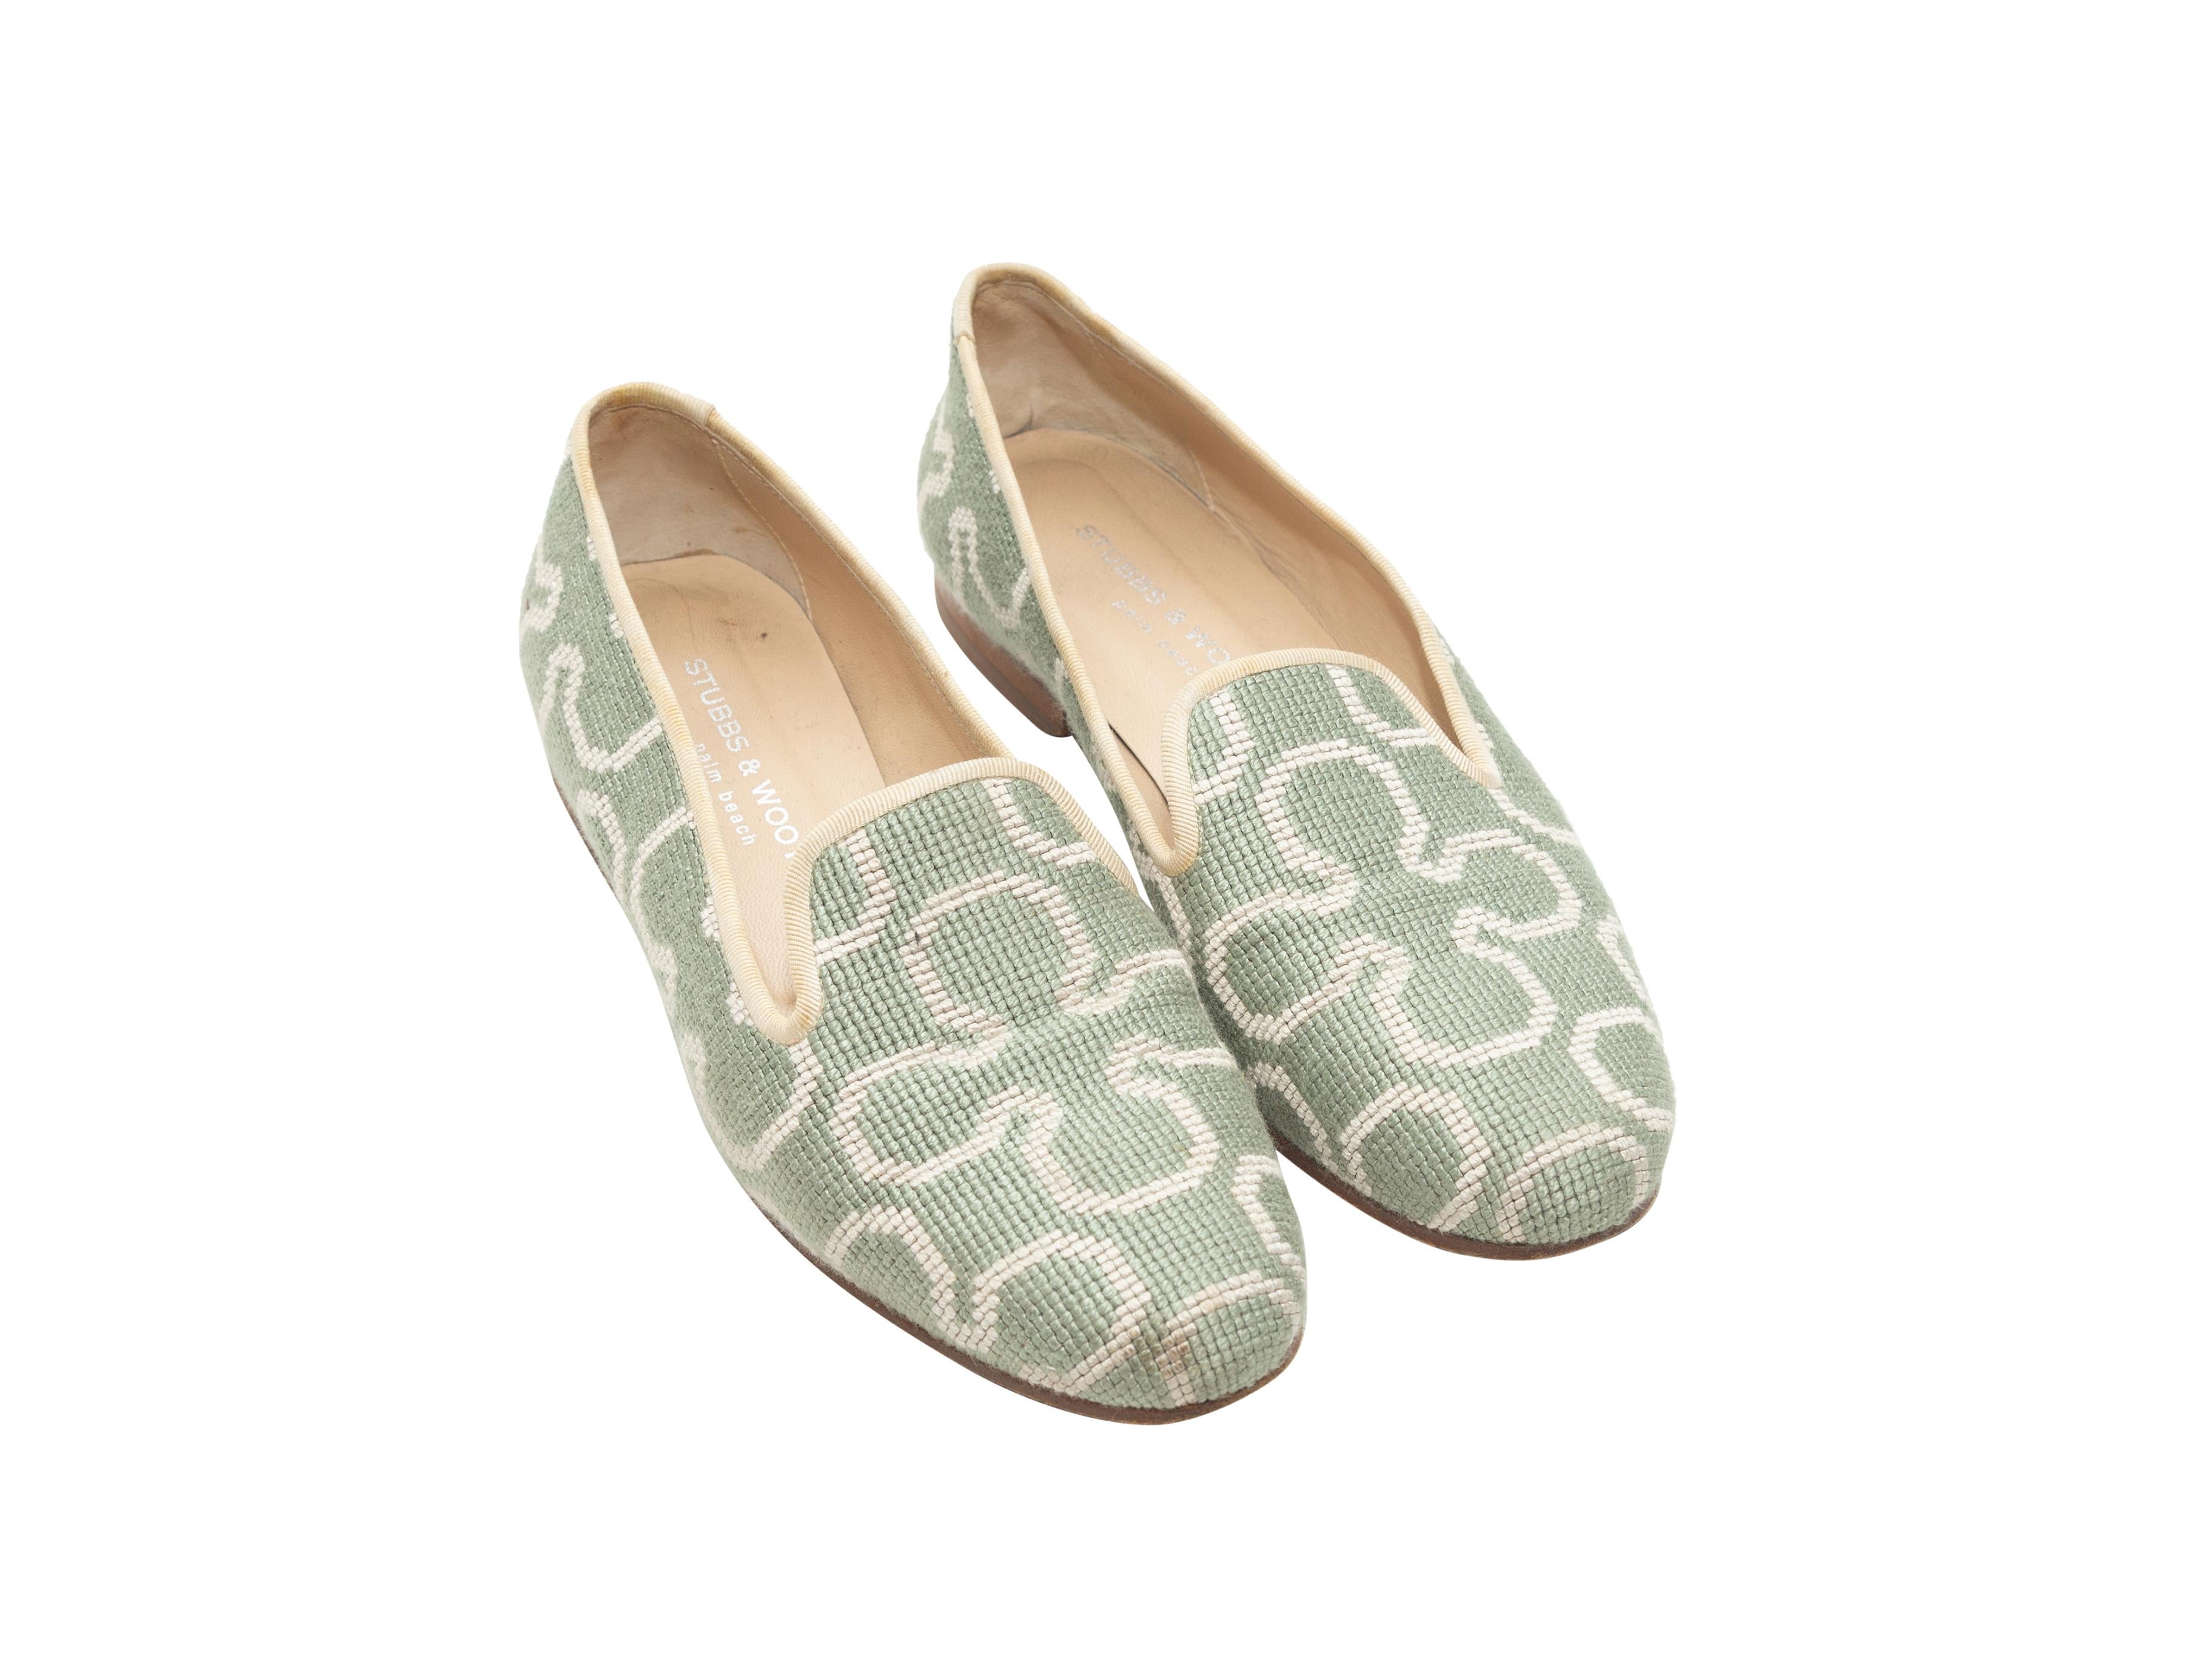 Product details: Sage green and beige round-toe loafers by Stubbs & Wootton. Grosgrain trim. Needlepoint pattern throughout. 0.75